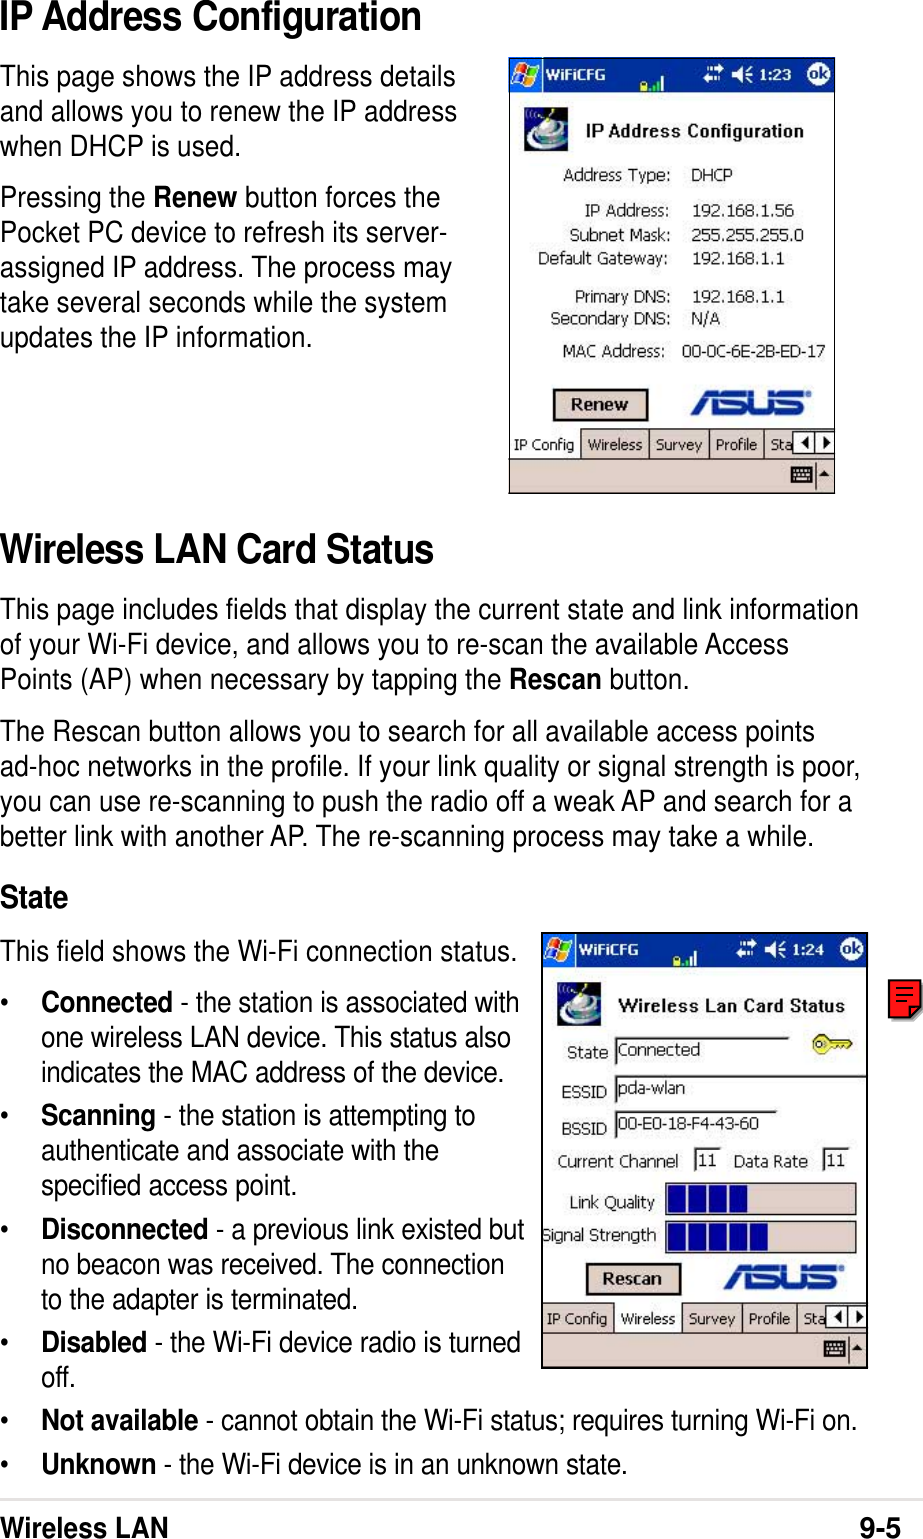 Wireless LAN9-5IP Address ConfigurationThis page shows the IP address detailsand allows you to renew the IP addresswhen DHCP is used.Pressing the Renew button forces thePocket PC device to refresh its server-assigned IP address. The process maytake several seconds while the systemupdates the IP information.Wireless LAN Card StatusThis page includes fields that display the current state and link informationof your Wi-Fi device, and allows you to re-scan the available AccessPoints (AP) when necessary by tapping the Rescan button.The Rescan button allows you to search for all available access pointsad-hoc networks in the profile. If your link quality or signal strength is poor,you can use re-scanning to push the radio off a weak AP and search for abetter link with another AP. The re-scanning process may take a while.StateThis field shows the Wi-Fi connection status.•Connected - the station is associated withone wireless LAN device. This status alsoindicates the MAC address of the device.•Scanning - the station is attempting toauthenticate and associate with thespecified access point.•Disconnected - a previous link existed butno beacon was received. The connectionto the adapter is terminated.•Disabled - the Wi-Fi device radio is turnedoff.•Not available - cannot obtain the Wi-Fi status; requires turning Wi-Fi on.•Unknown - the Wi-Fi device is in an unknown state.